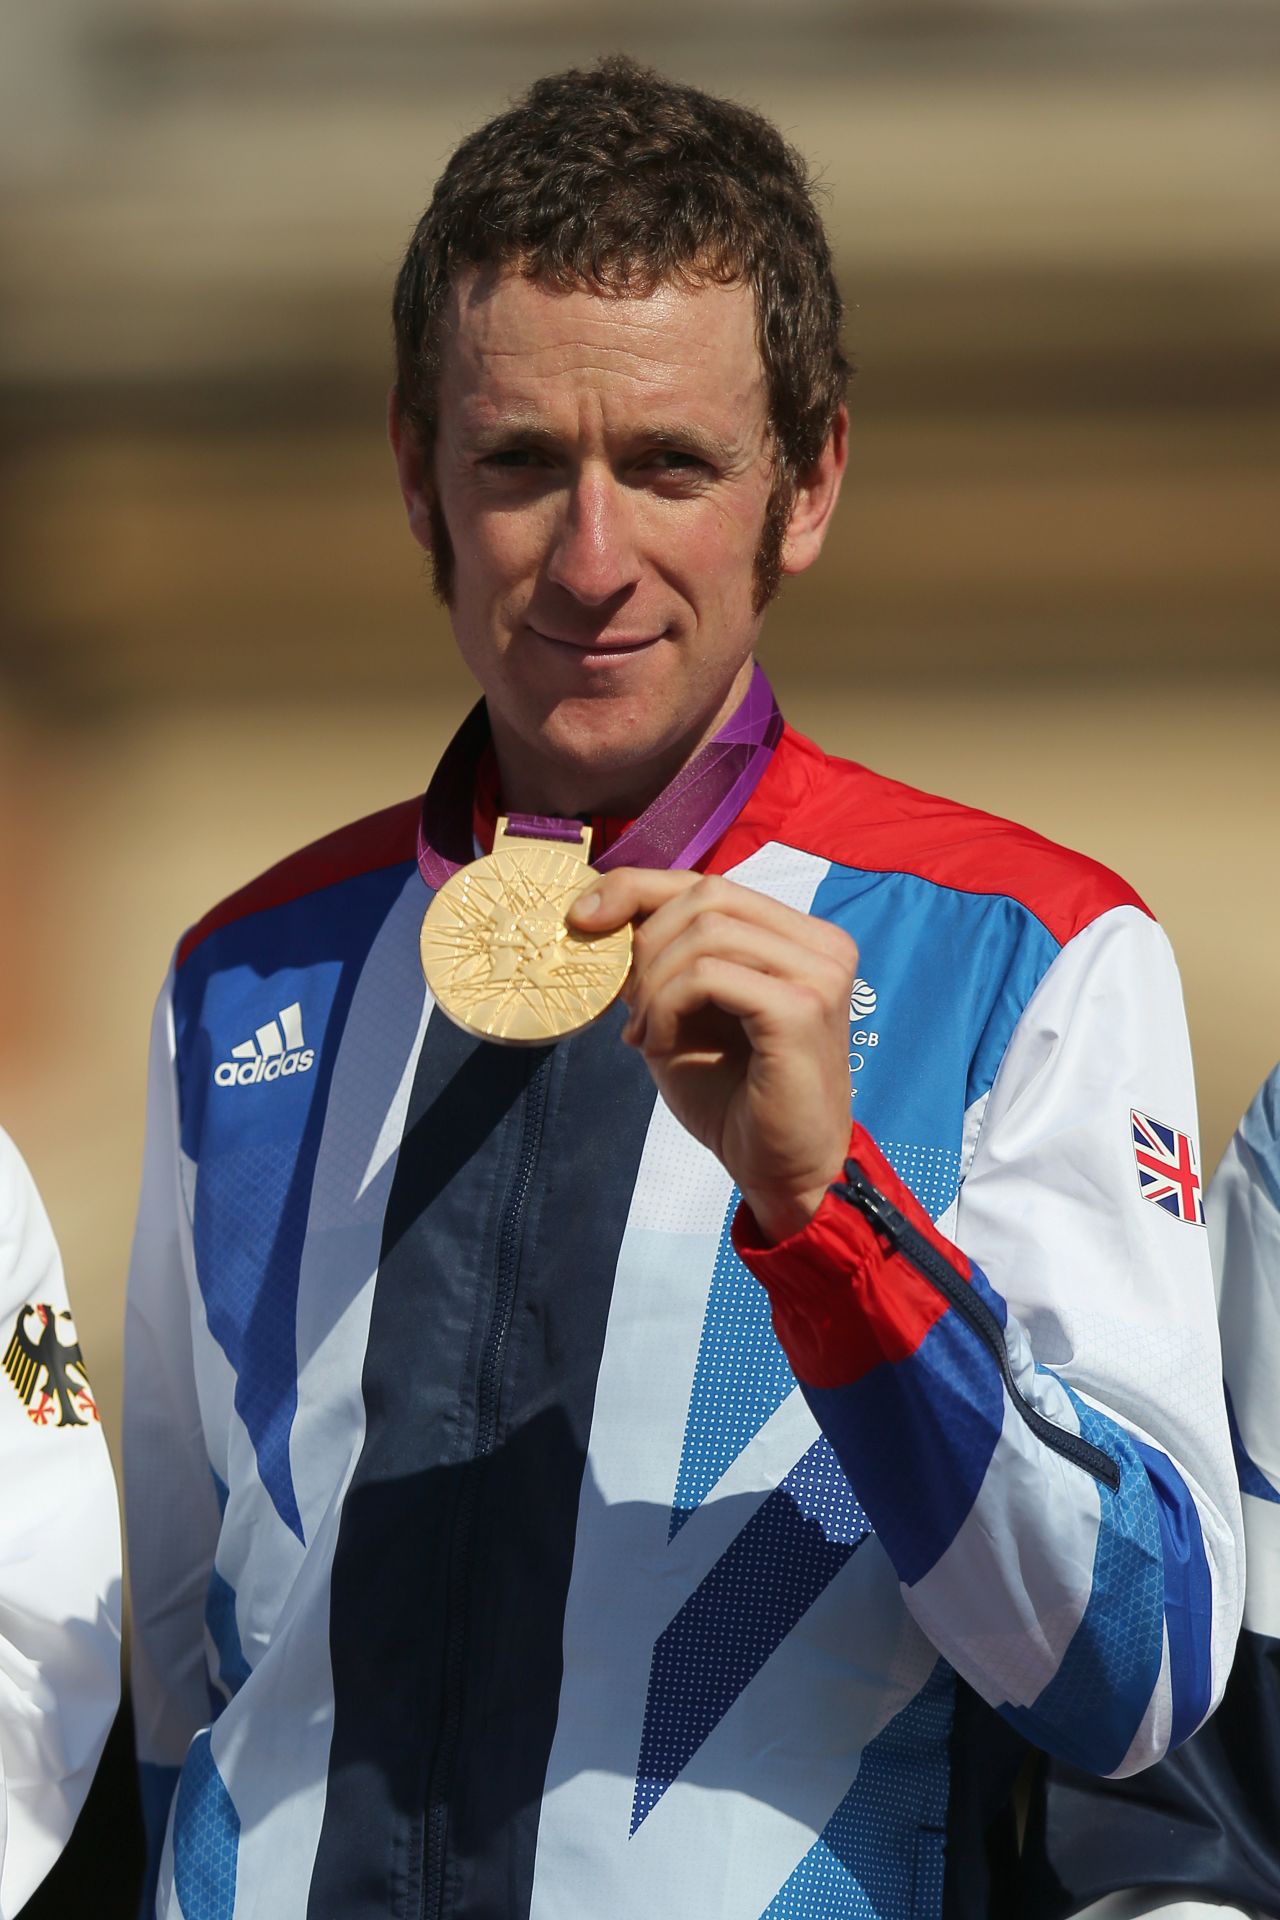 After securing the 2012 Tour de France, Wiggins went on to win  the men's individual time trial event at the London Olympics.